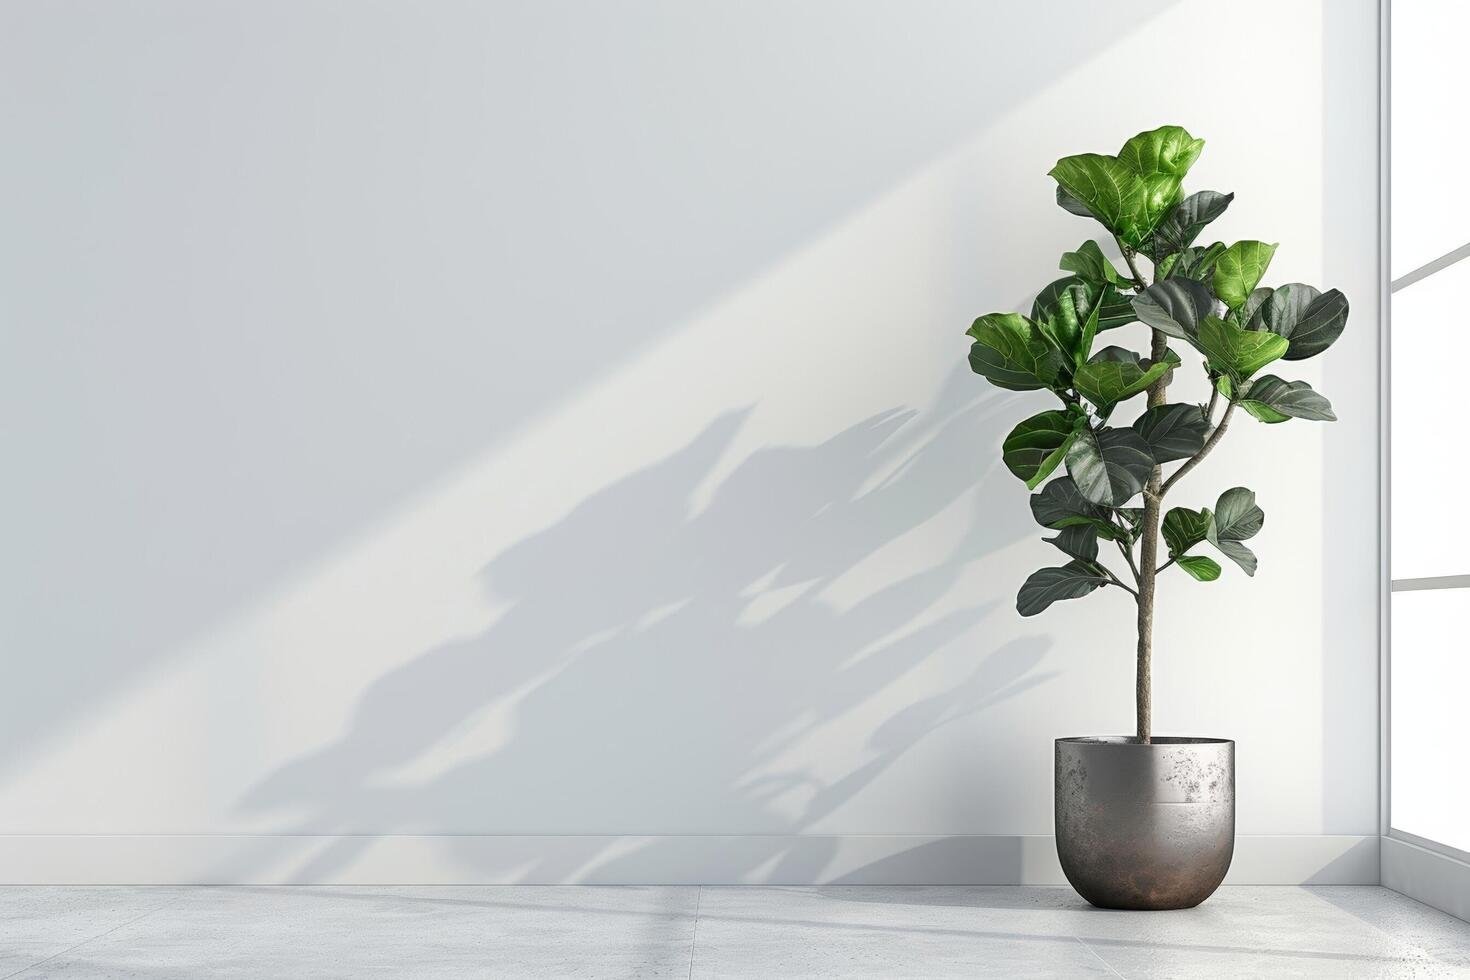 The fiddle leaf fig tree looks striking in a modern metallic planter. photo